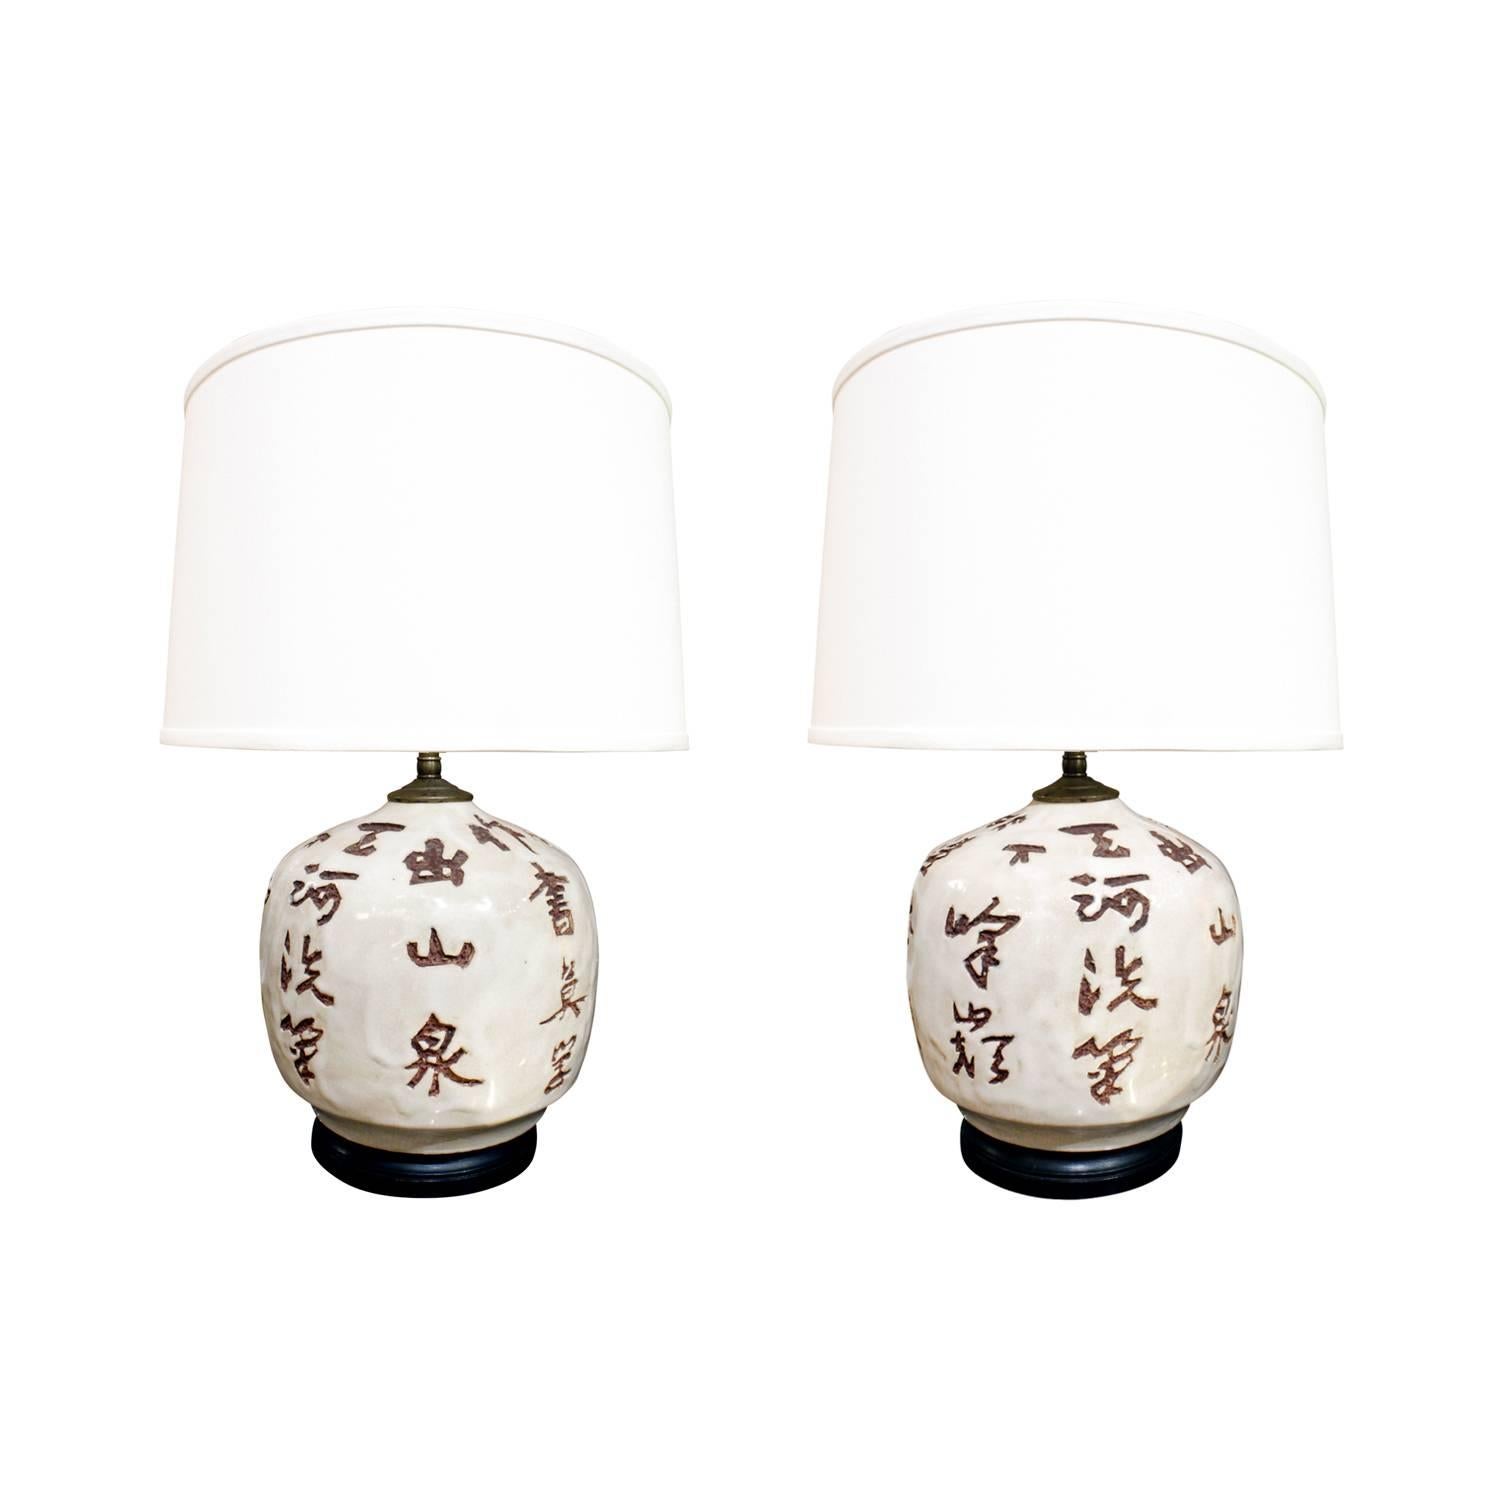 Pair of Ceramic Lamps with Chinese Character Decoration, 1950s